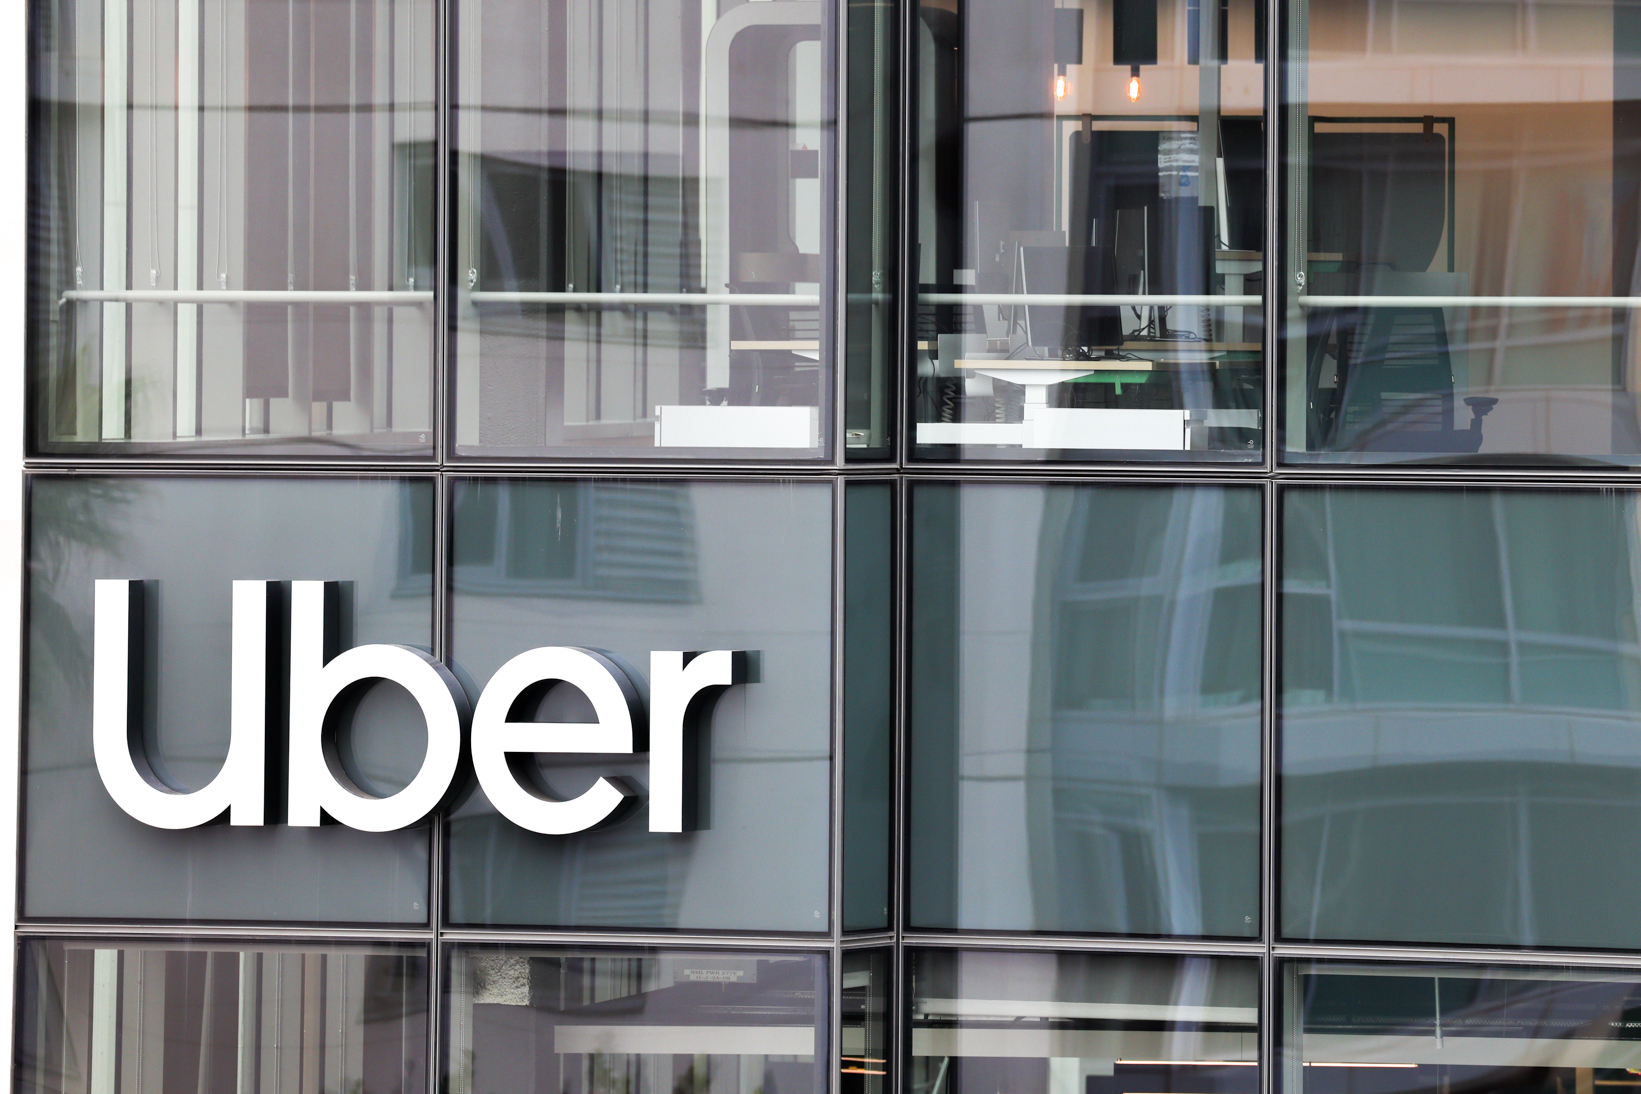 The image shows the large &quot;Uber&quot; logo on the exterior of a modern building with glass facade and reflections.